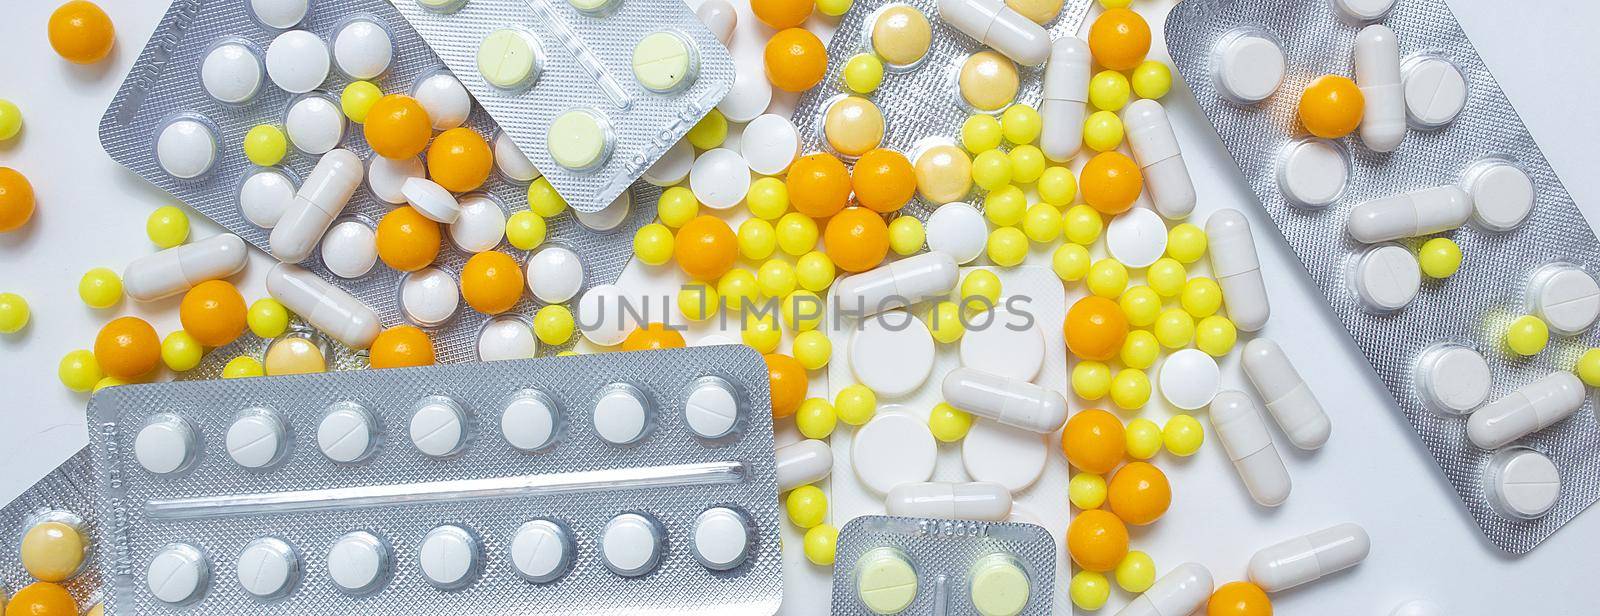 different colorful and white pills, capsules. Prevention, cure of influenza, coronavirus, covid-19. yellow, orange vitamins, tablets on white background. medical healthcare, protection concept banner